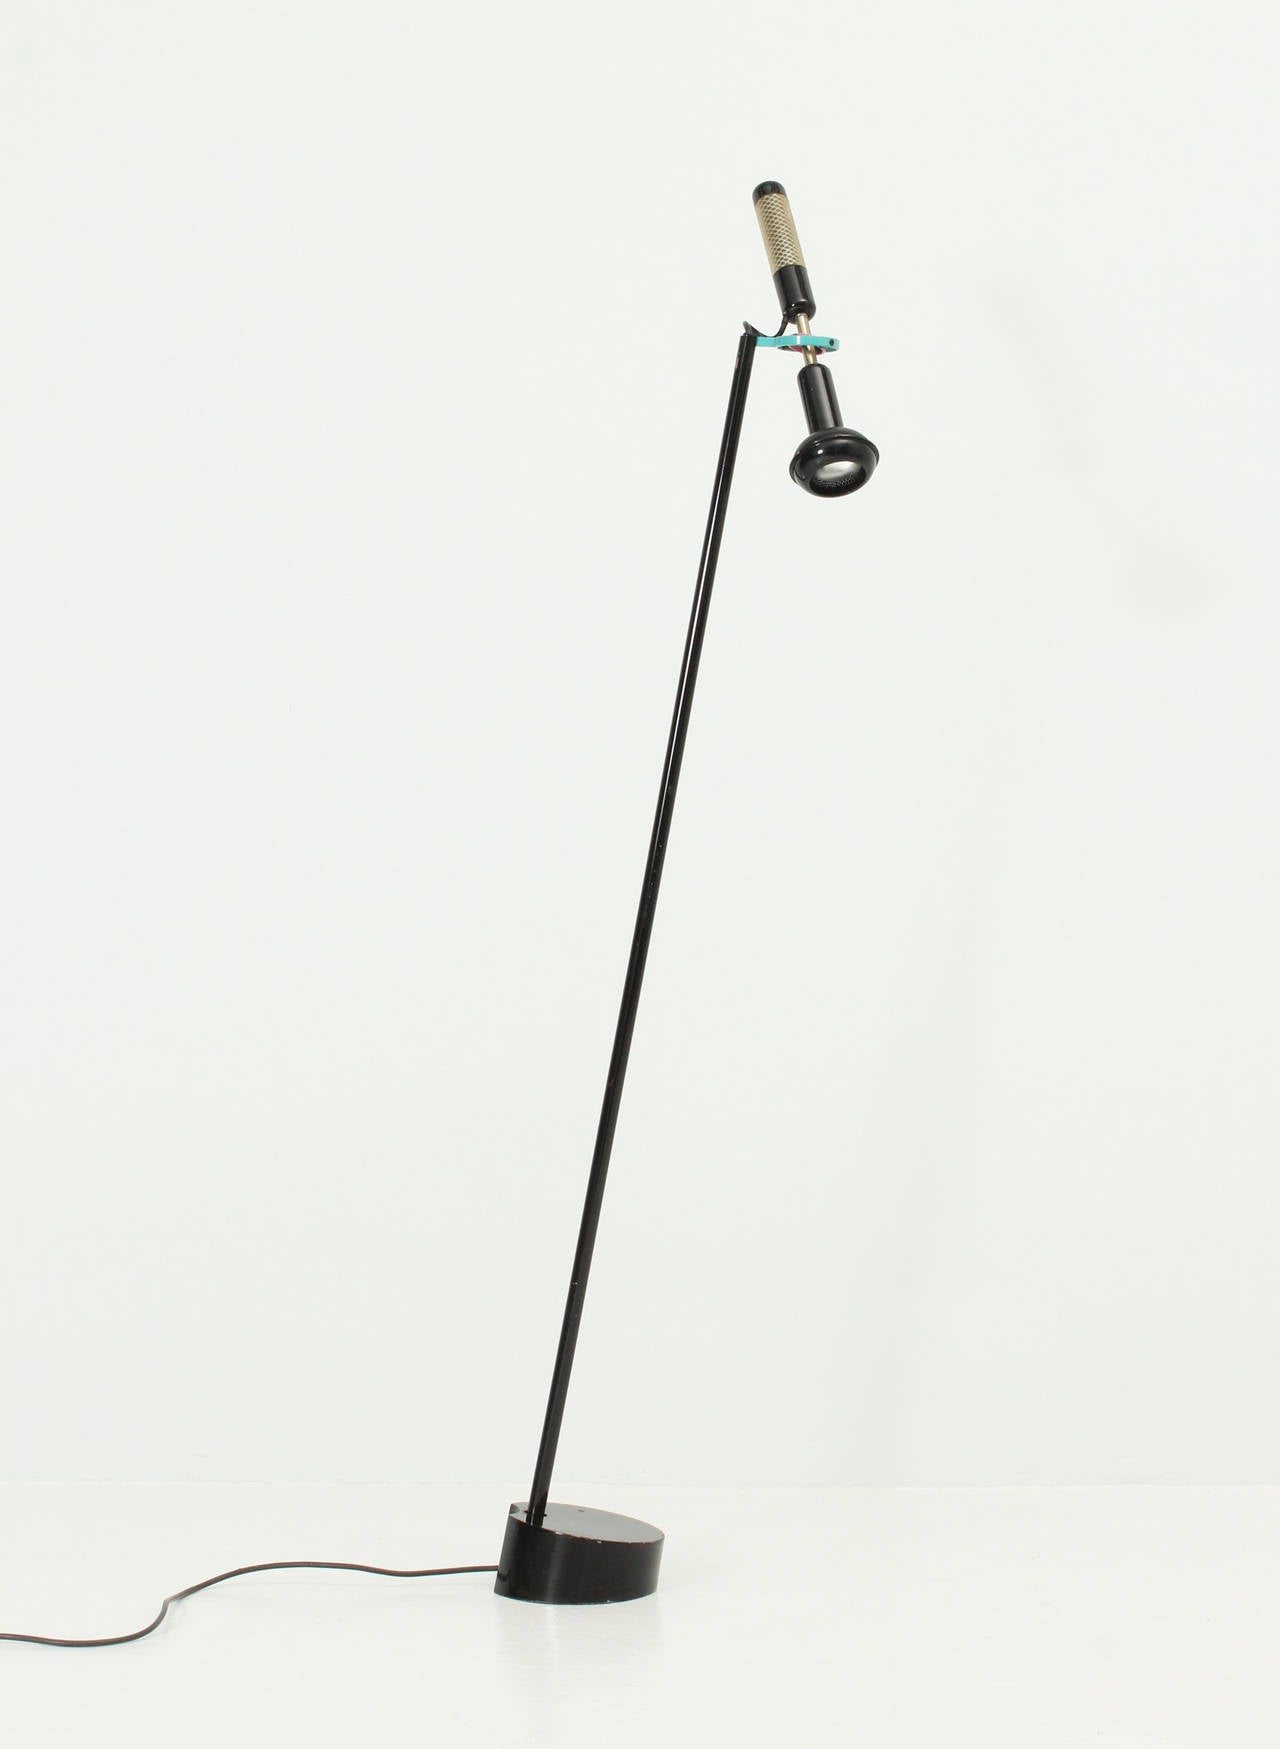 Grip floor lamp designed in 1985 by Achille Castiglioni for Flos, Italy. Lacquered metal and rubber grip used to direct the light and as switch.